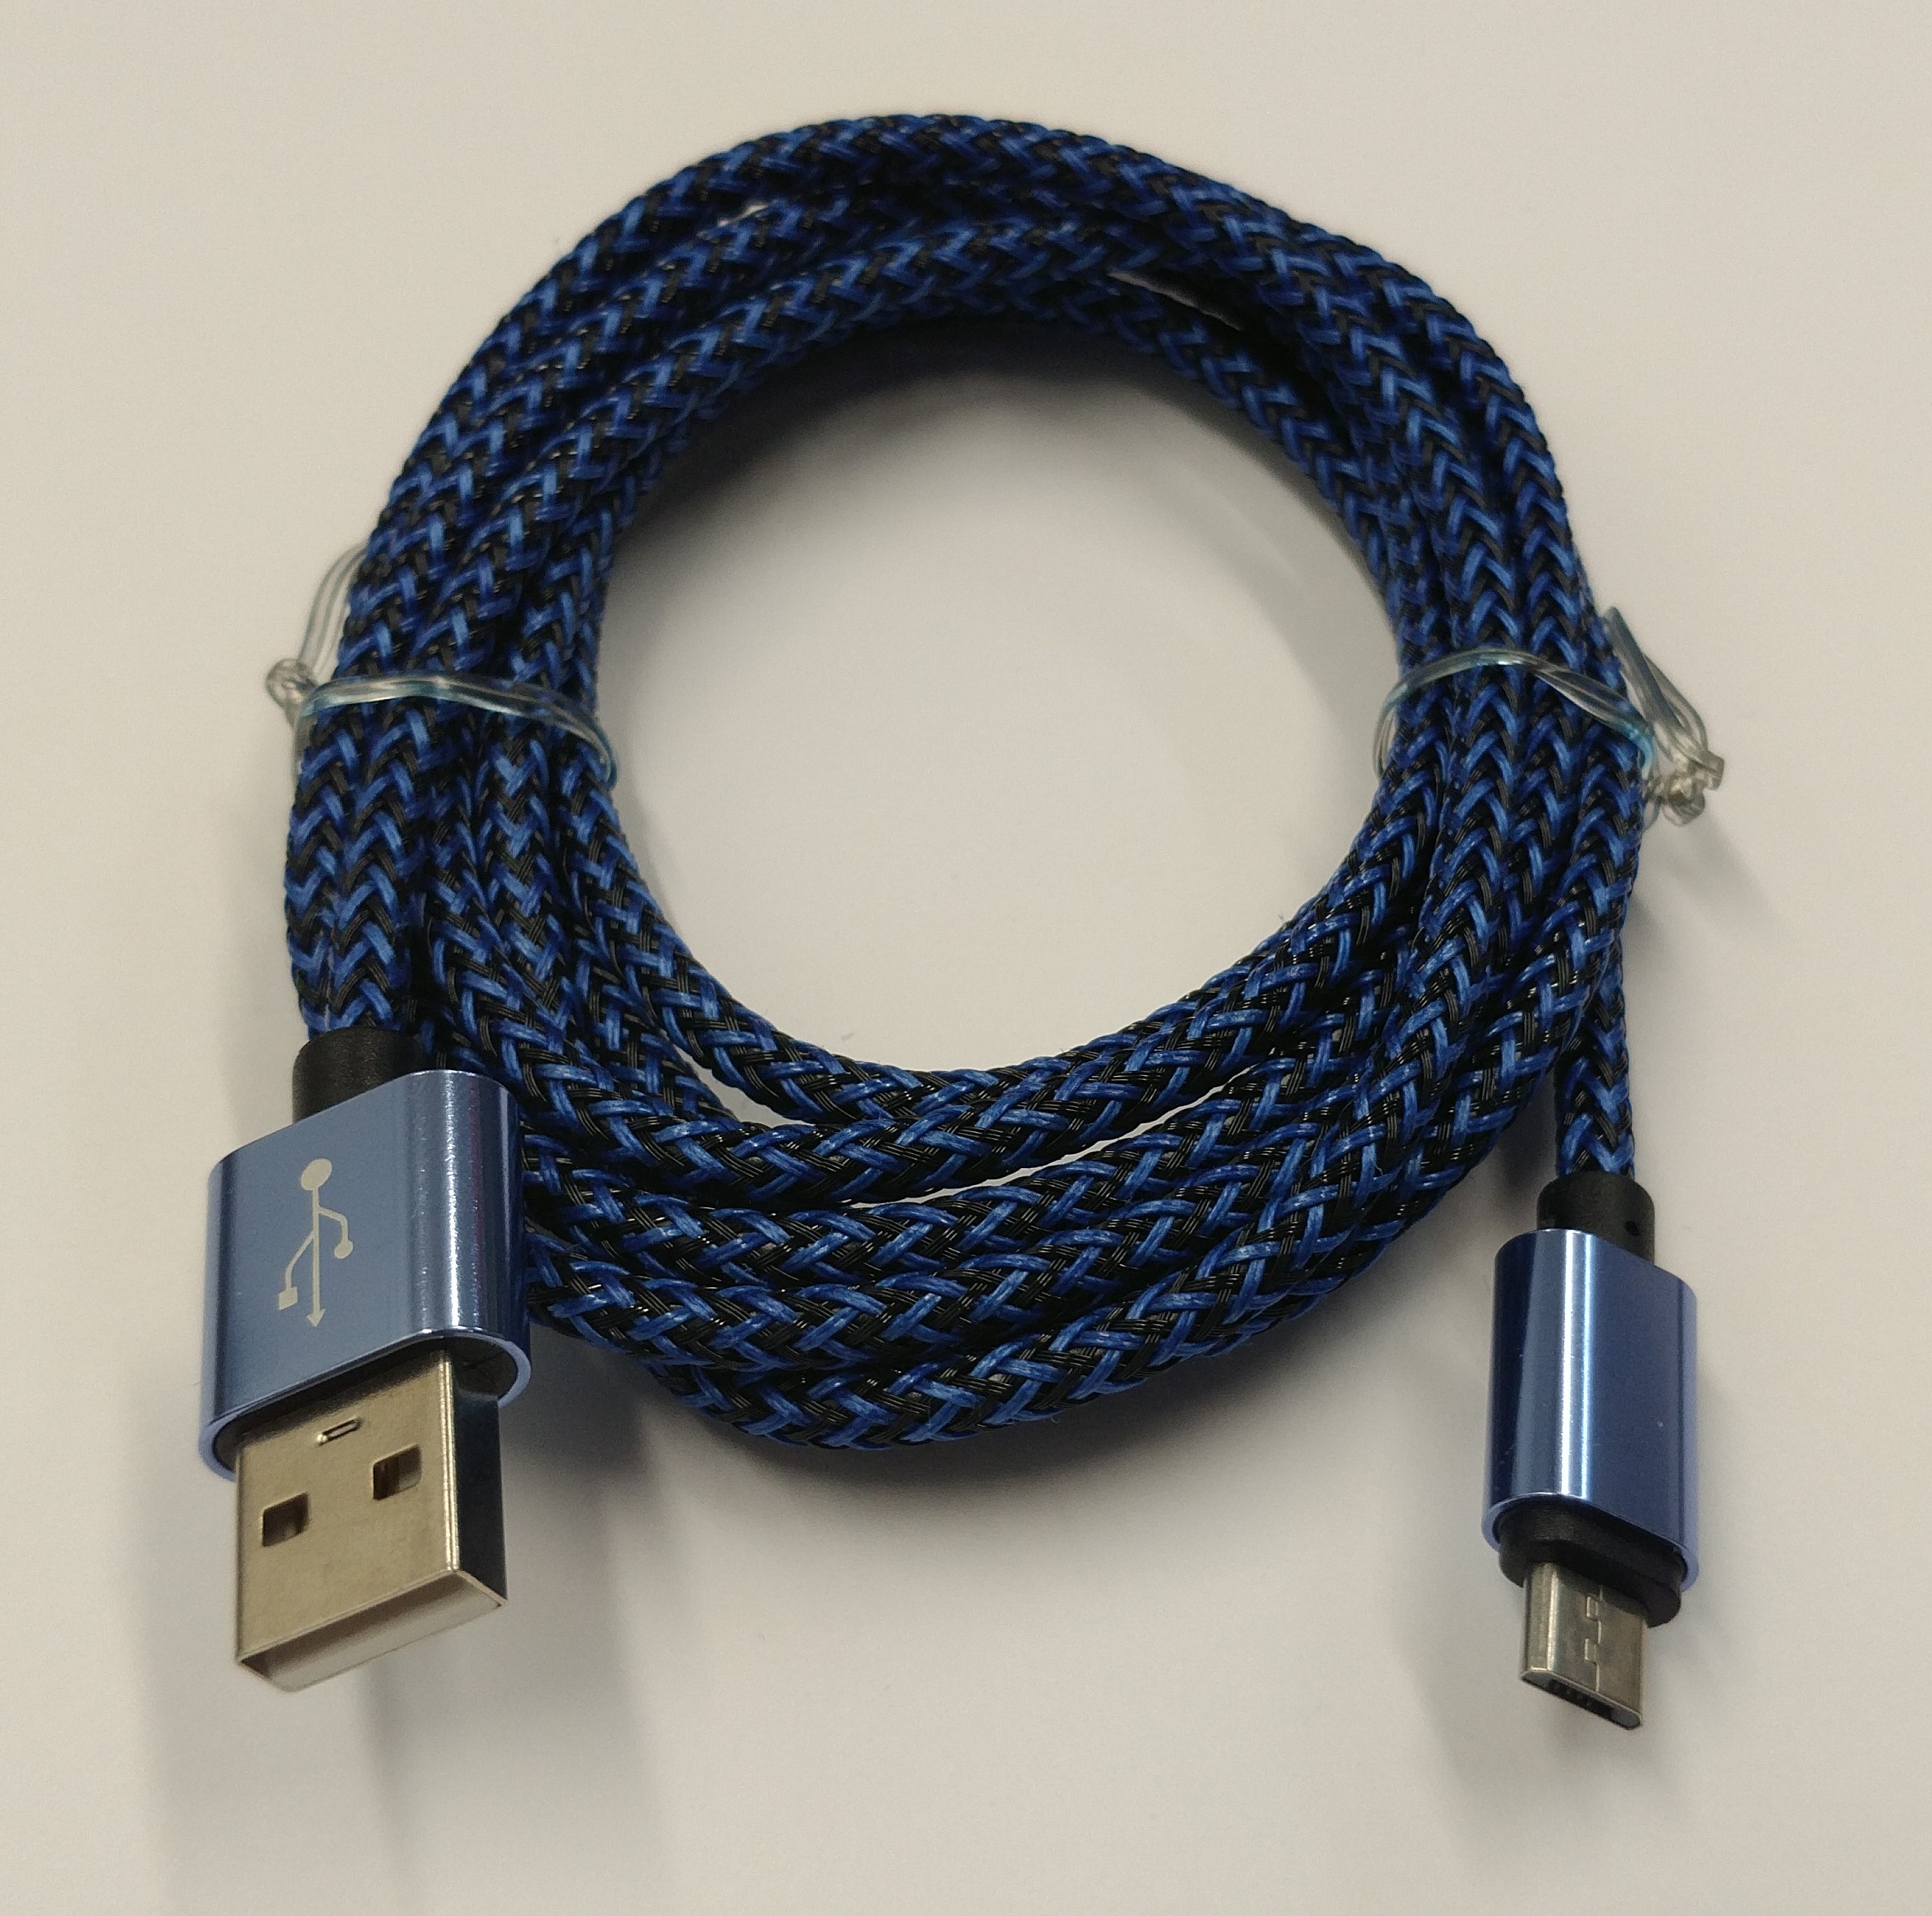 PS4/XB1/MISC: USB CHARGE N PLAY CABLE - 10FT MICRO USB (DARK BLUE)(NEW)